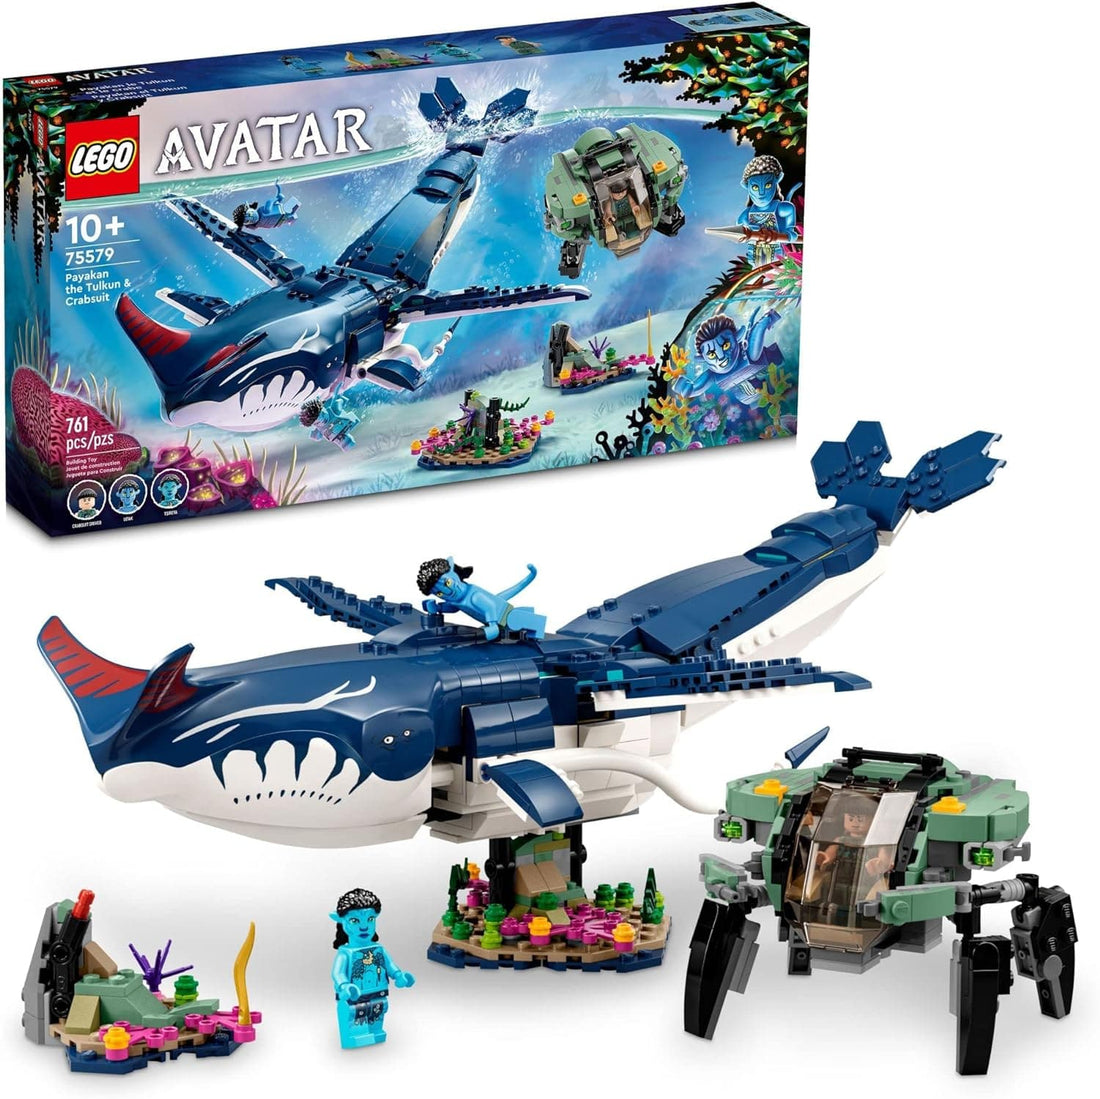 LEGO Avatar: The Way of Water Payakan The Tulkun & Crabsuit with Whale-Like Sea Animal Creature Figure - best price from Maltashopper.com 75579